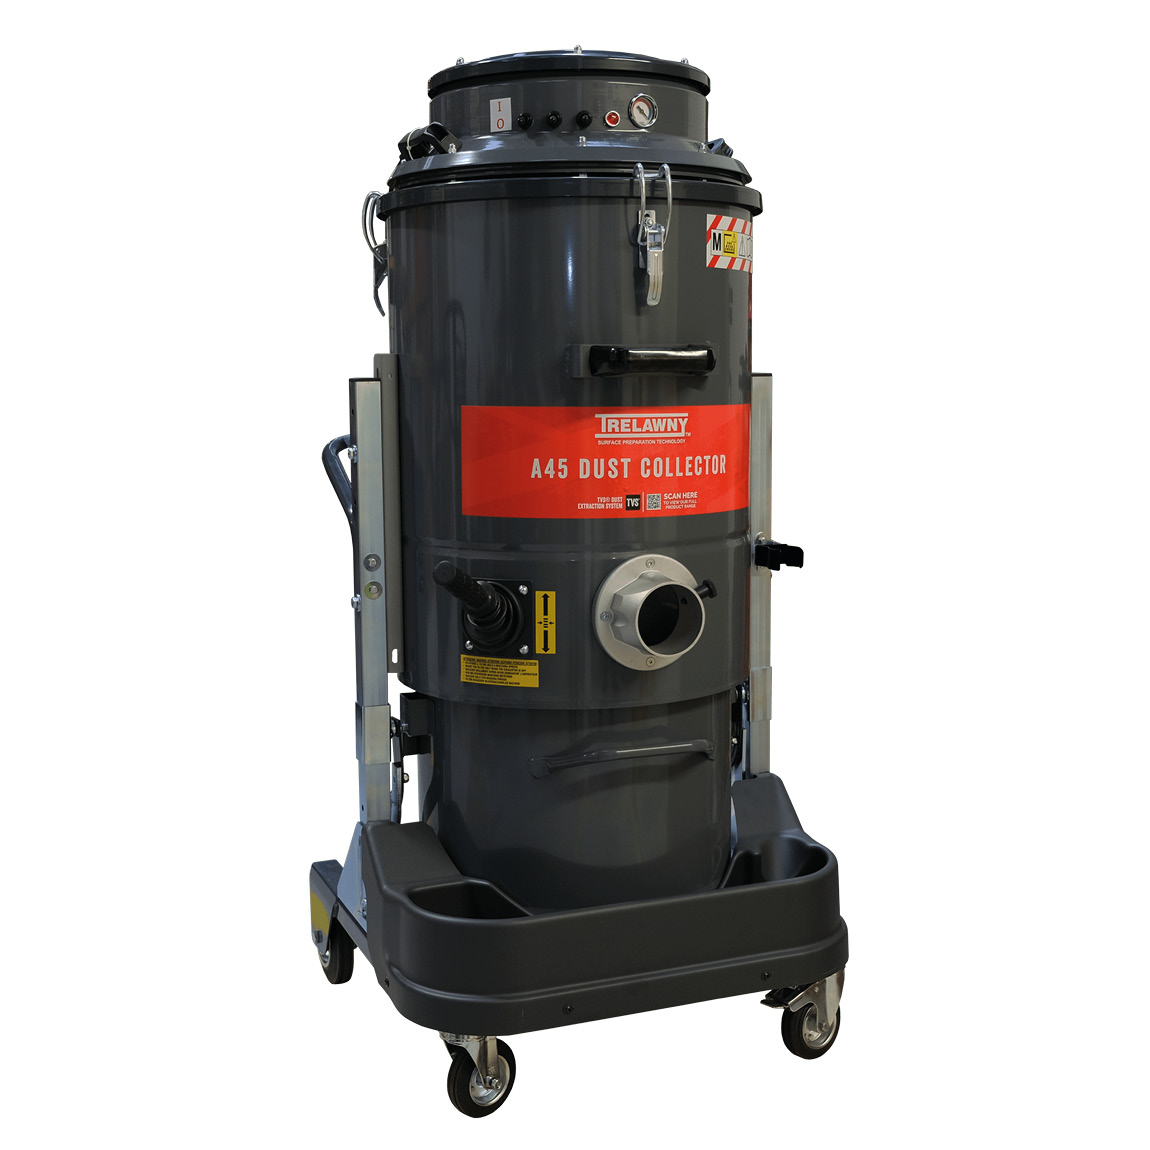 Hire the A45 Dust Collector made by Trelawny. Ideal for industrial use. Ideal for expansion saw joints on concrete floors and grinding concrete. Available to rent from Speedcrete, United Kingdom.